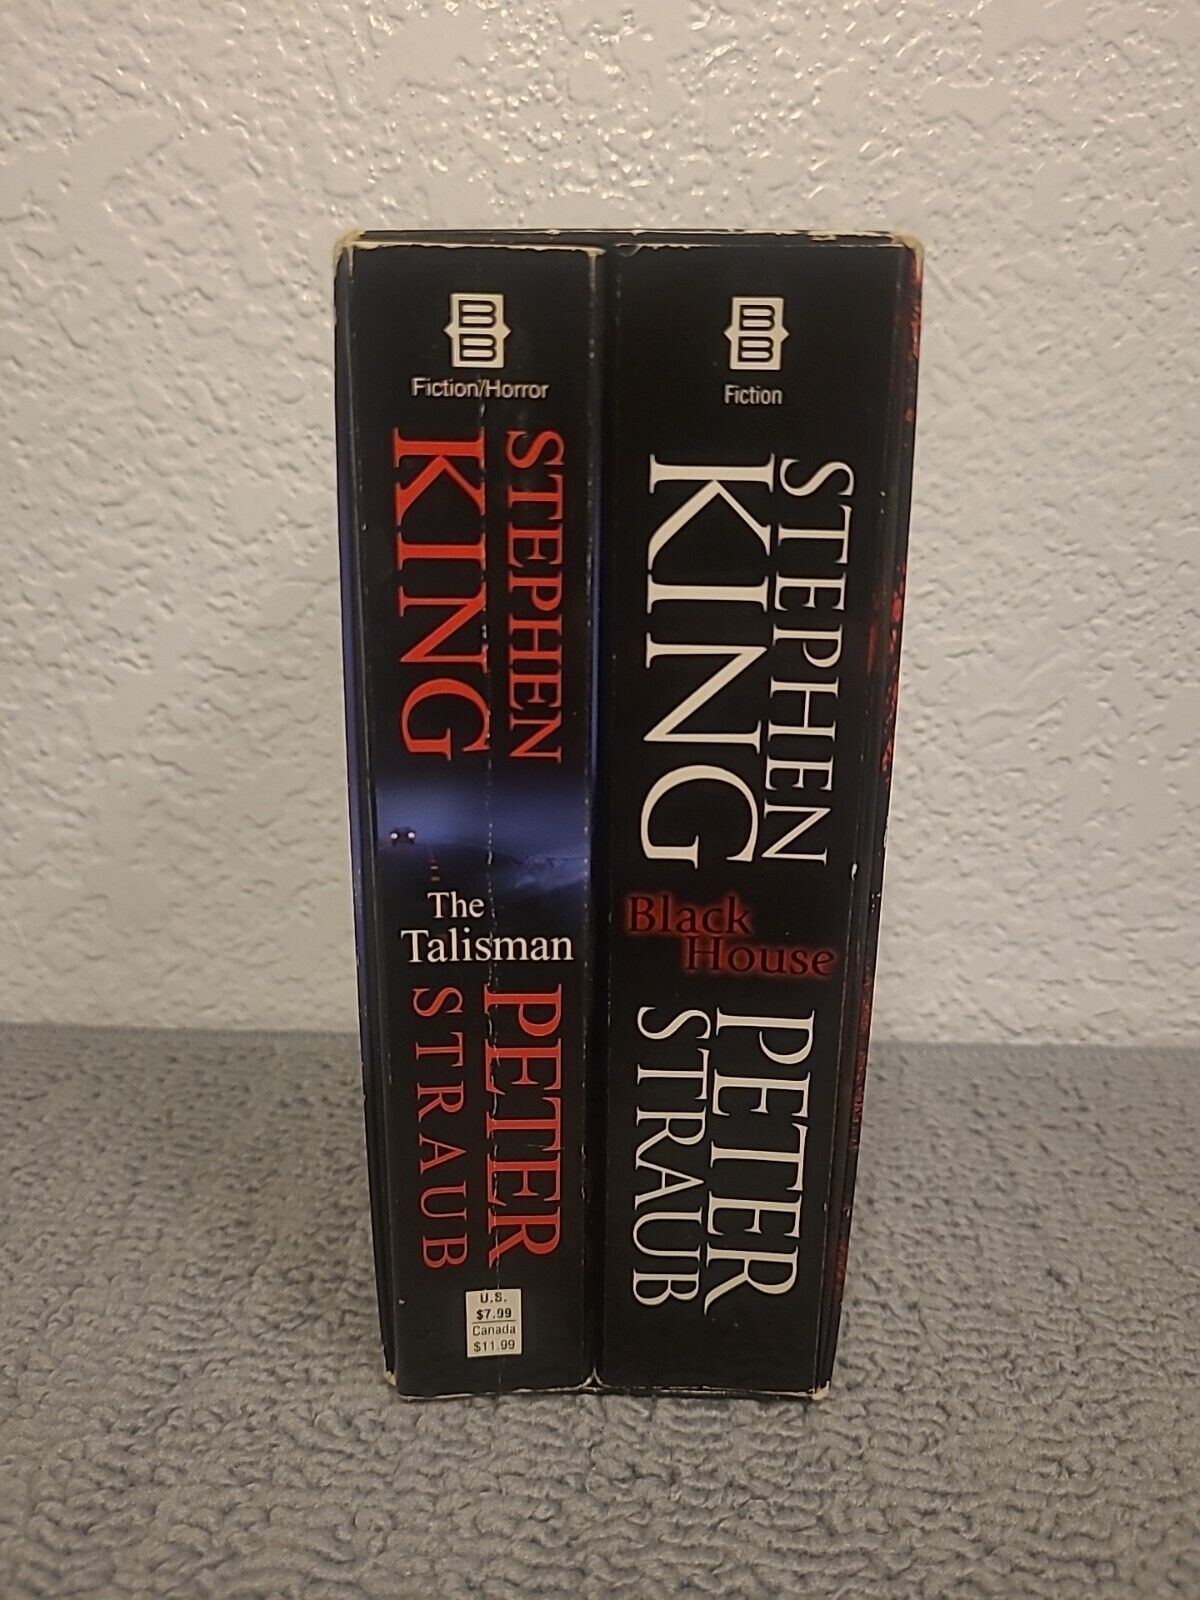 Stephen King by Stephen King and Peter Straub (2002, Trade Paperback / Trade... - Stephen King, Peter Straub